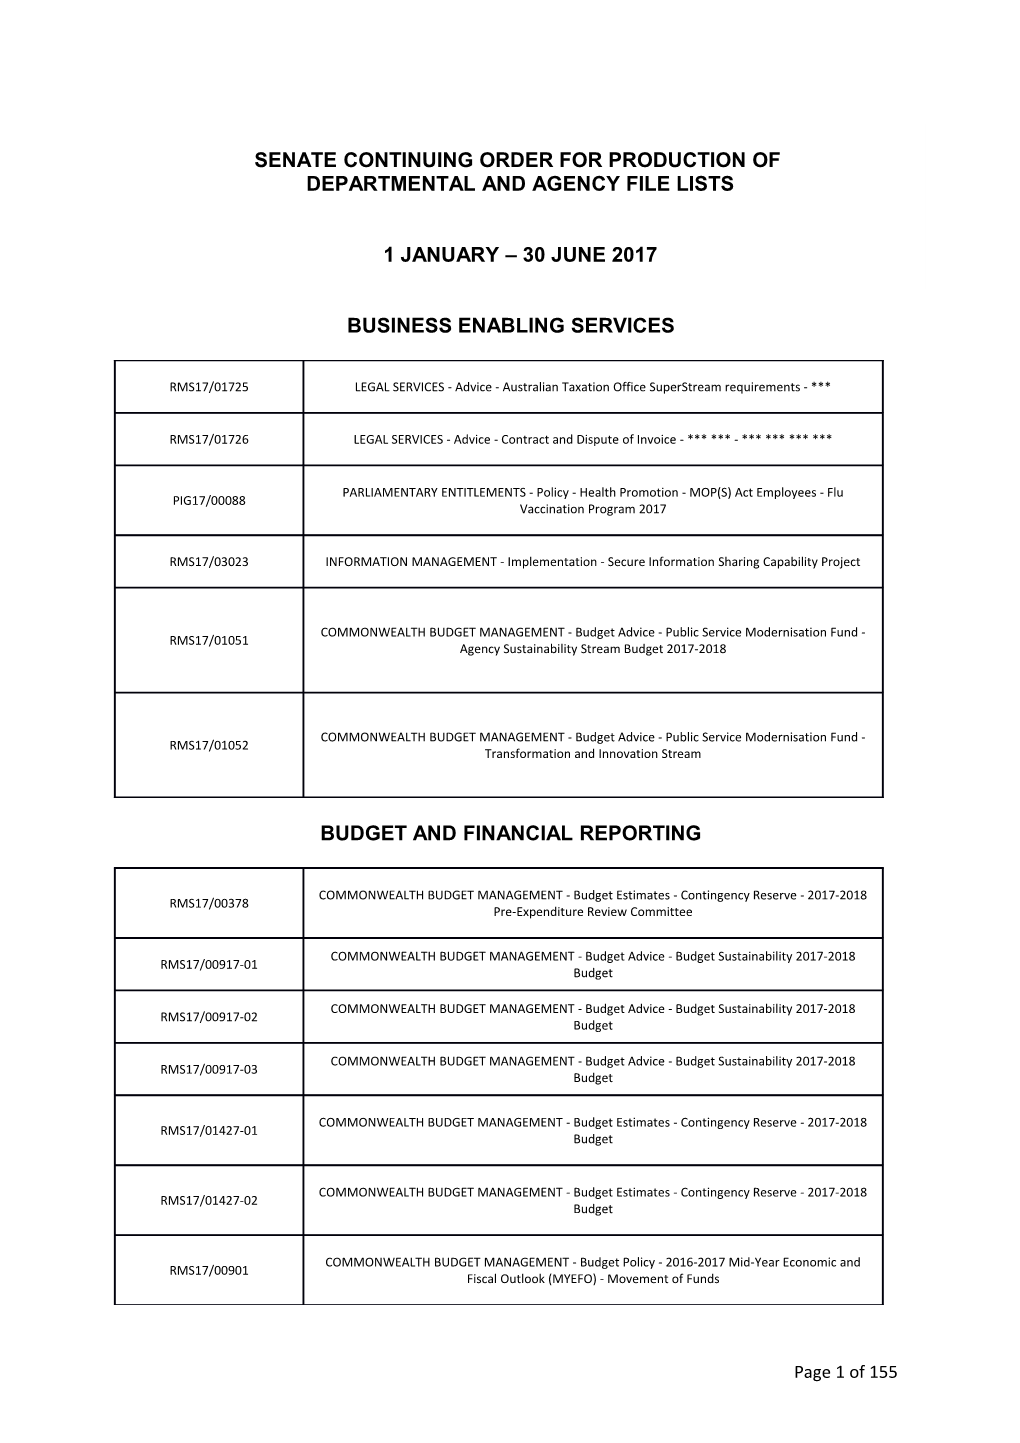 Senate Continuing Order for Production of 1 January 30 June 2017